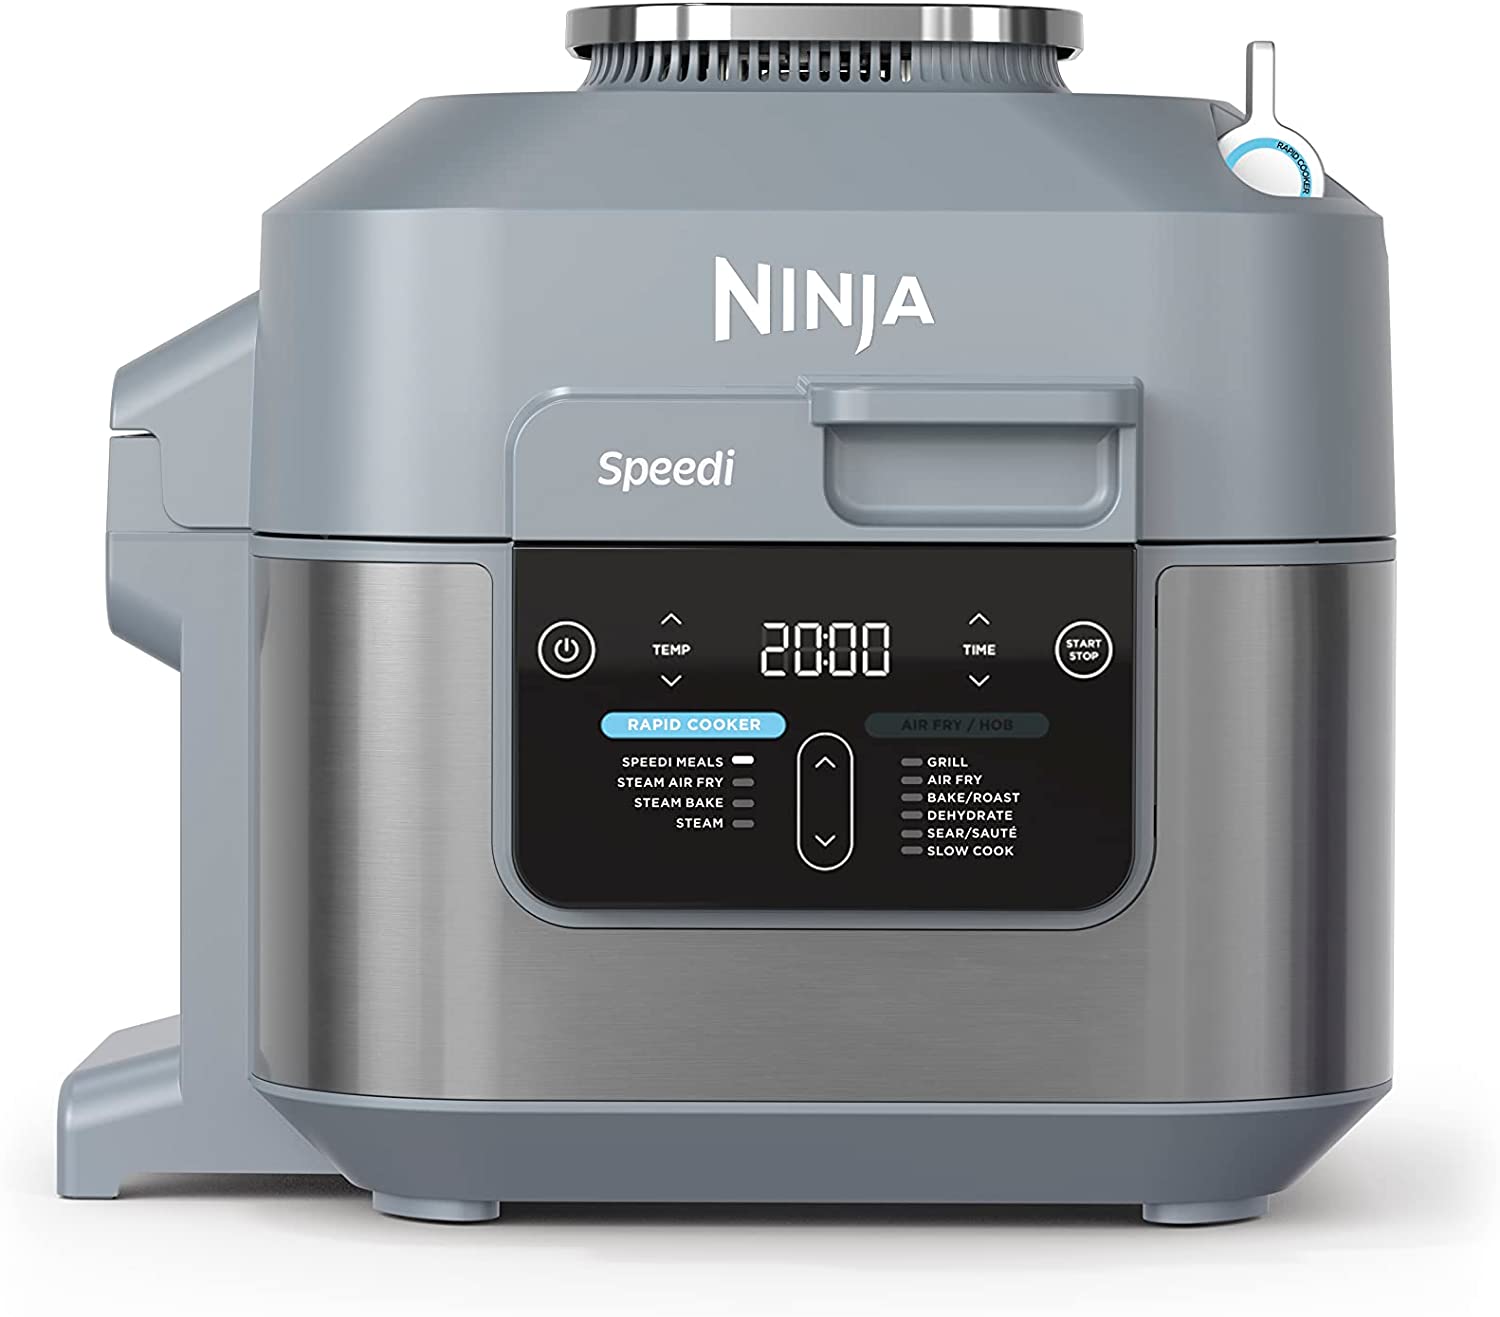 Ninja Speedi 10-in-1 Rapid Cooker and Air Fryer ON400UK Review: Meals fast